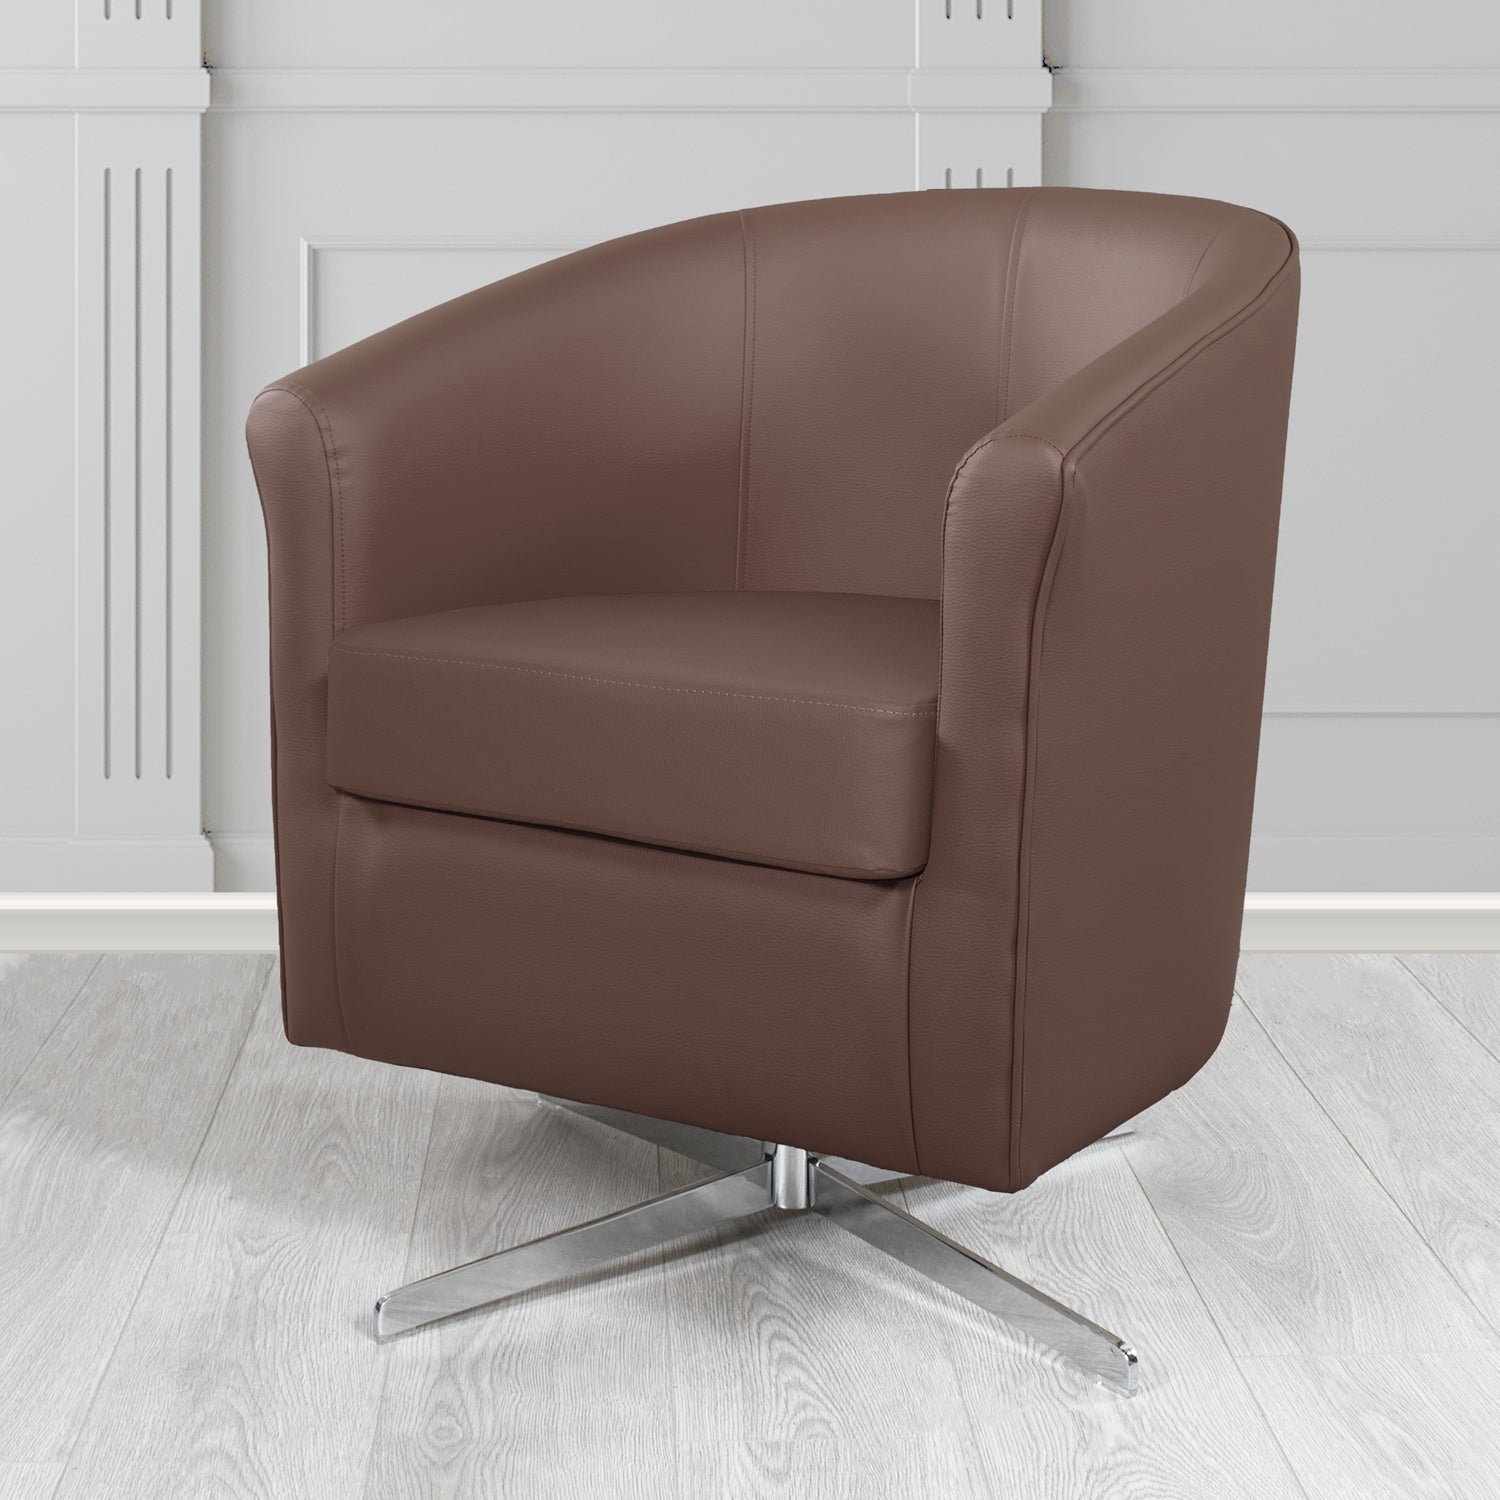 Cannes Swivel Tub Chair in Just Colour Cocoa Crib 5 Faux Leather - The Tub Chair Shop